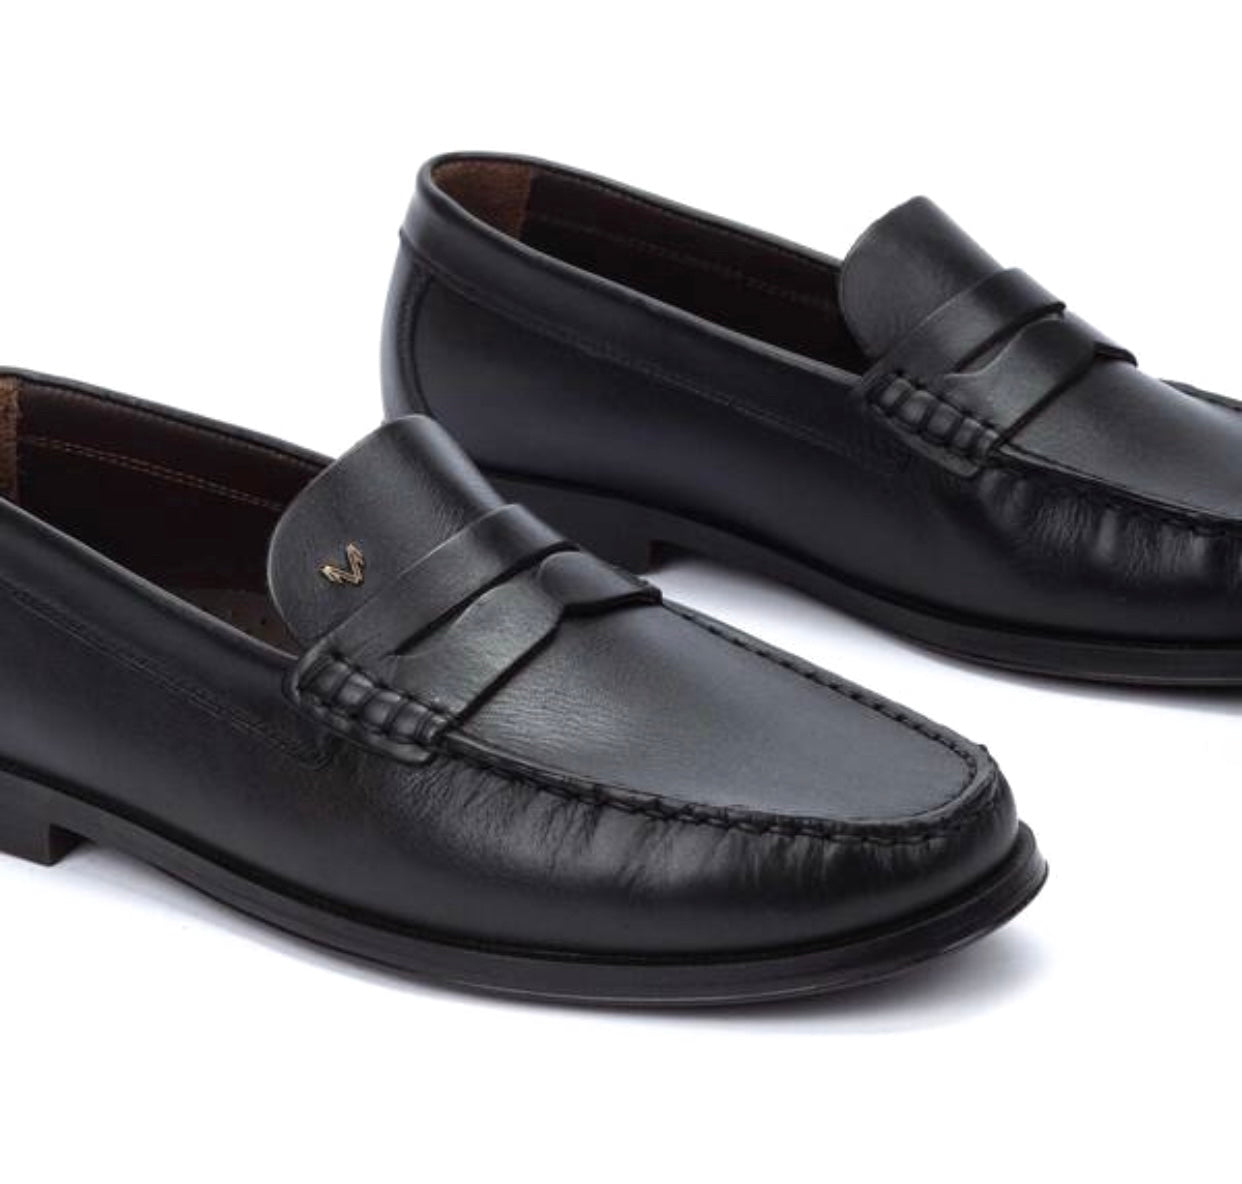 Martinelli Forthill 1623-2760E Black Leather Loafers Slip On Shoes Made In Spain